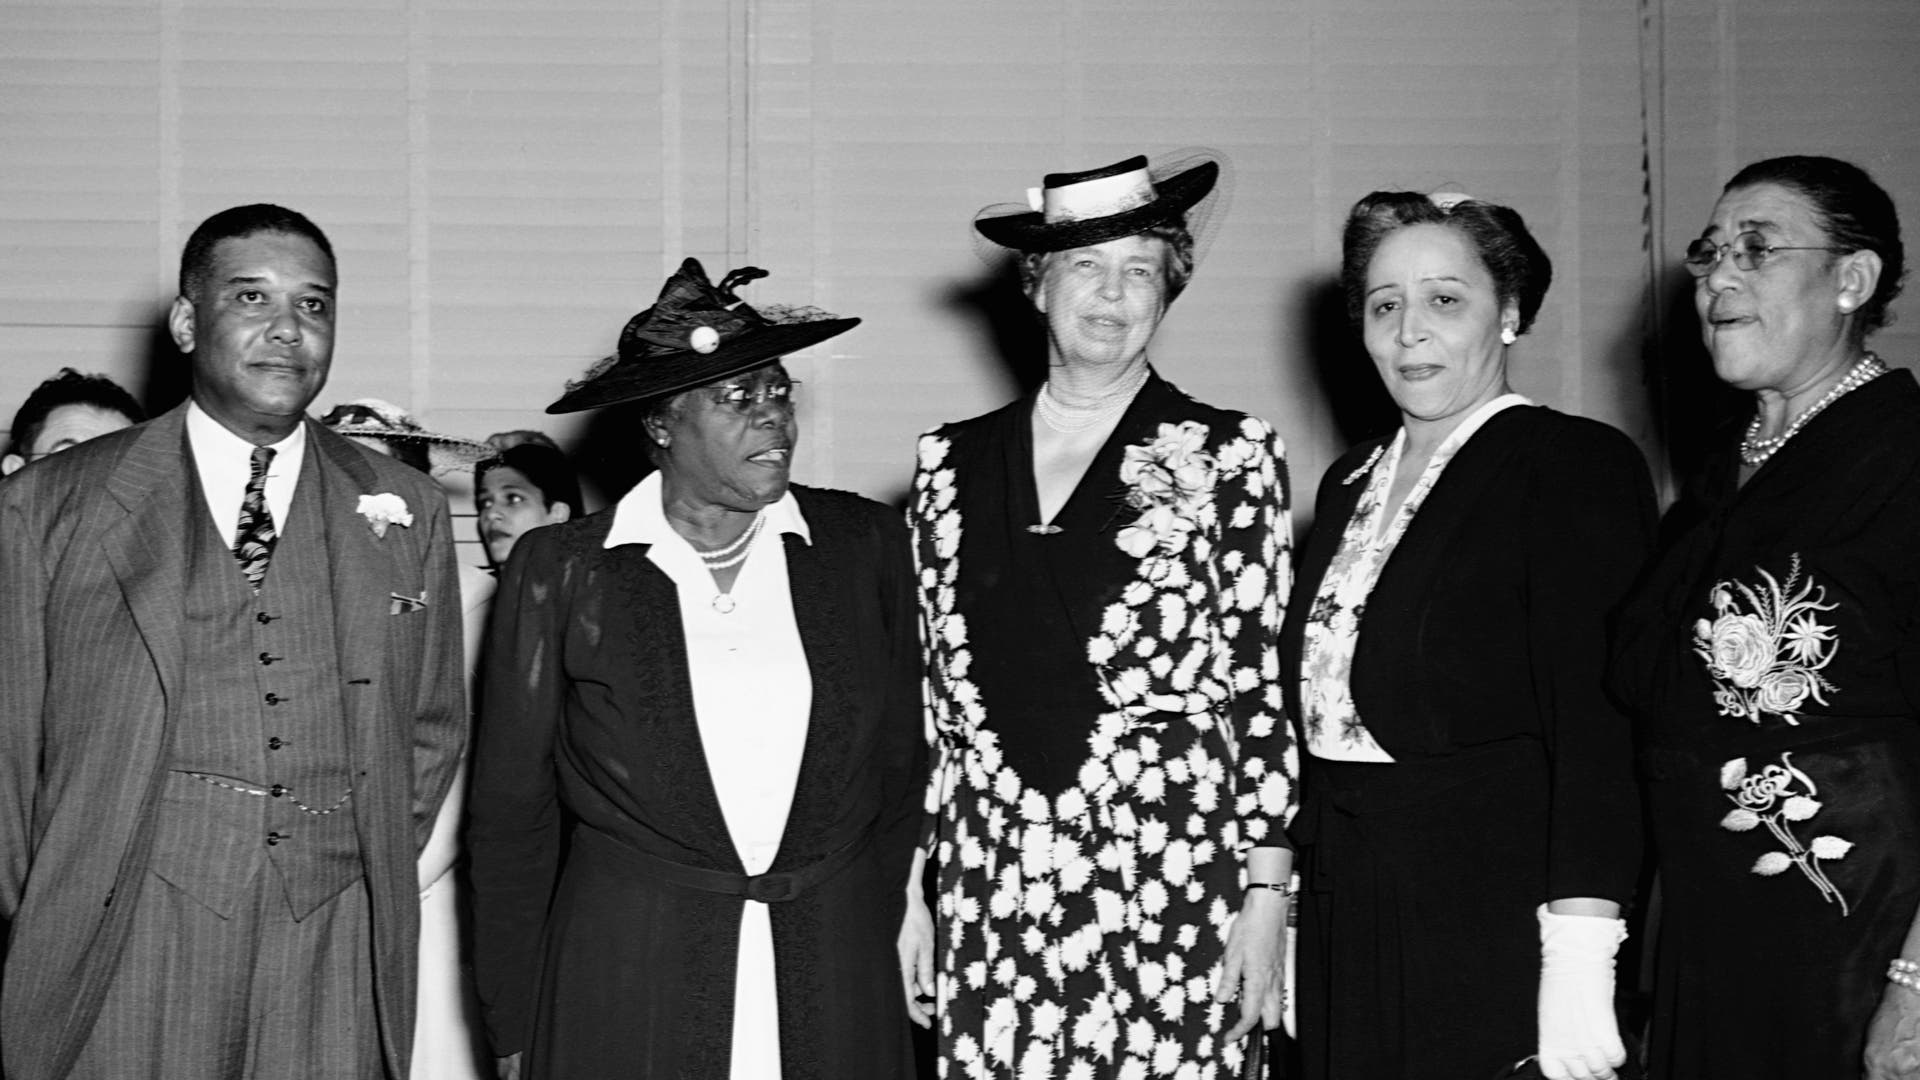 Eleanor Roosevelt and Dr. Mary Bethune Visit George Washington Carver HallEleanor Roosevelt and Dr. Mary McLeod Bethune are visiting George Washington Carver Hall, a men's dormitory for blacks. Washington, D.C., May 1943. | Location: George Washington Carver Hall, Washington, D.C., USA. (Photo by © CORBIS/Corbis via Getty Images)